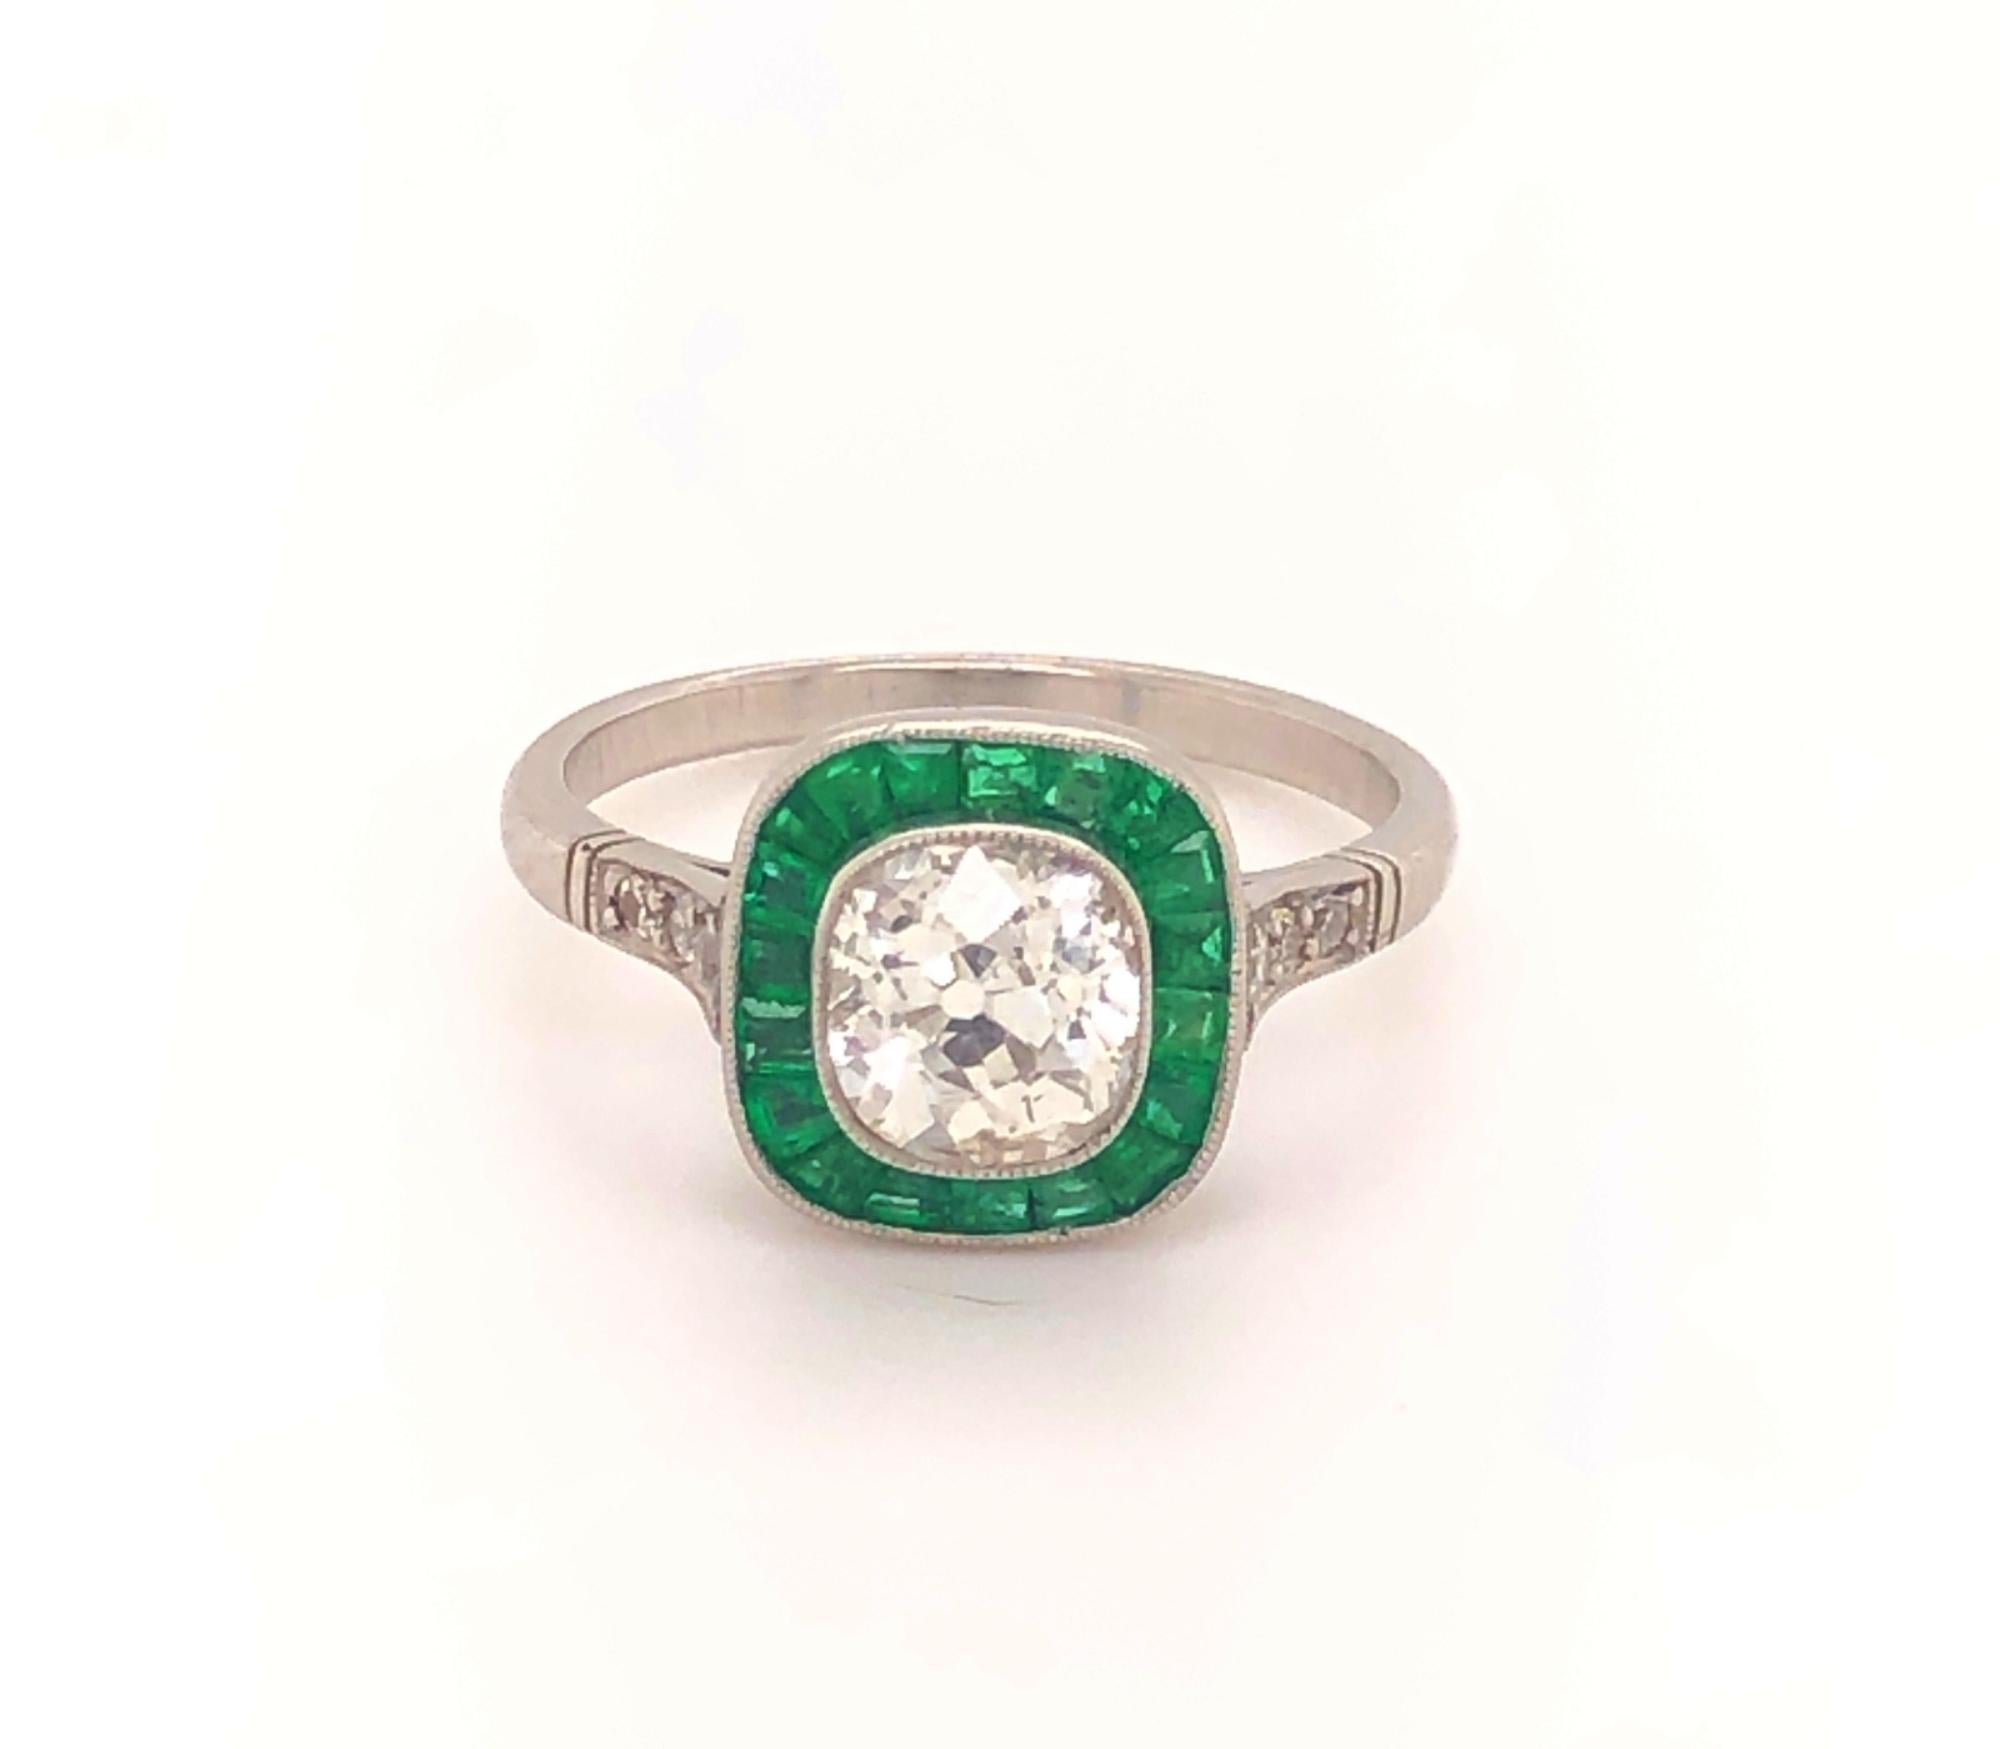 Art Deco Style 1.22 Old Mine Cushion Cut Diamond Emeralds Platinum Ring. The center diamond is a white sparkly old mine cushion cut J color SI-1 clarity. The halo has 20 natural caliber cut emeralds. On each shoulder are three diamonds. The gallery